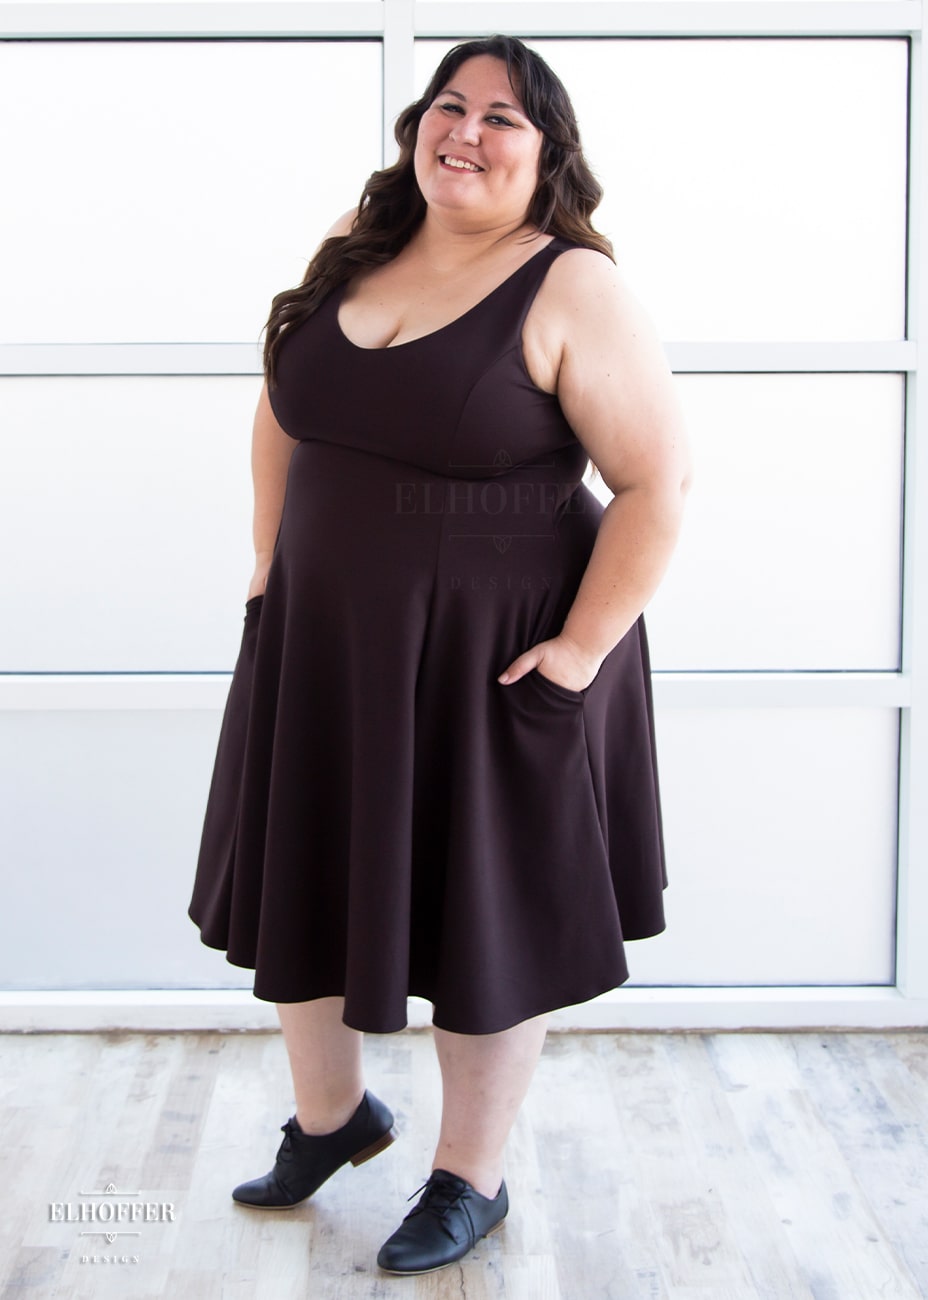 Alysia, a sun kissed skin XL model with long wavy dark brown hair, is smiling while wearing a reversible knee length chocolate brown dress with pockets.  The dress has a v neck on one side and a boat neck on the other and princess seams.